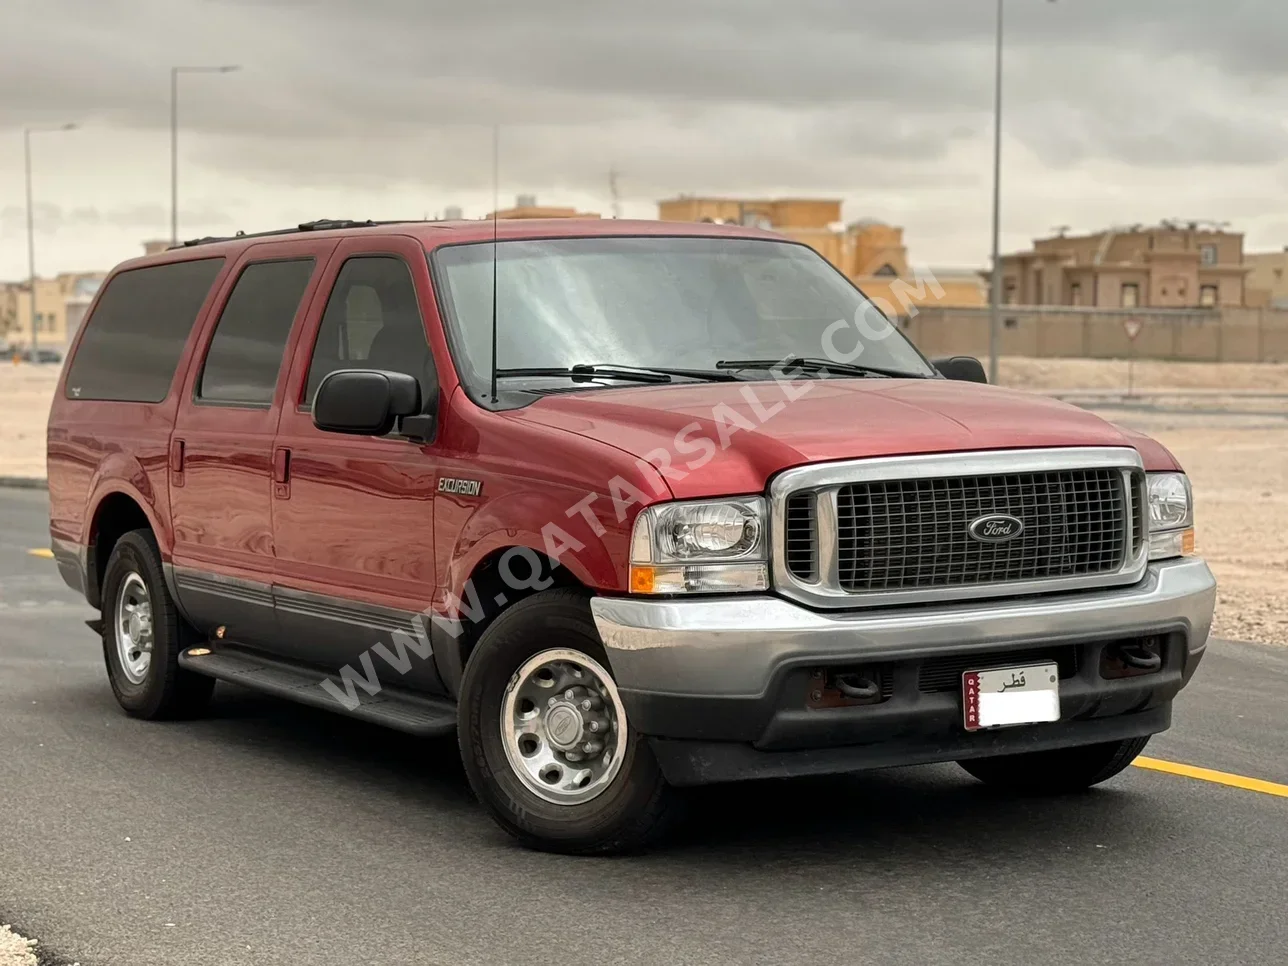 Ford  Excursion  2001  Automatic  195,000 Km  10 Cylinder  Four Wheel Drive (4WD)  Pick Up  Red